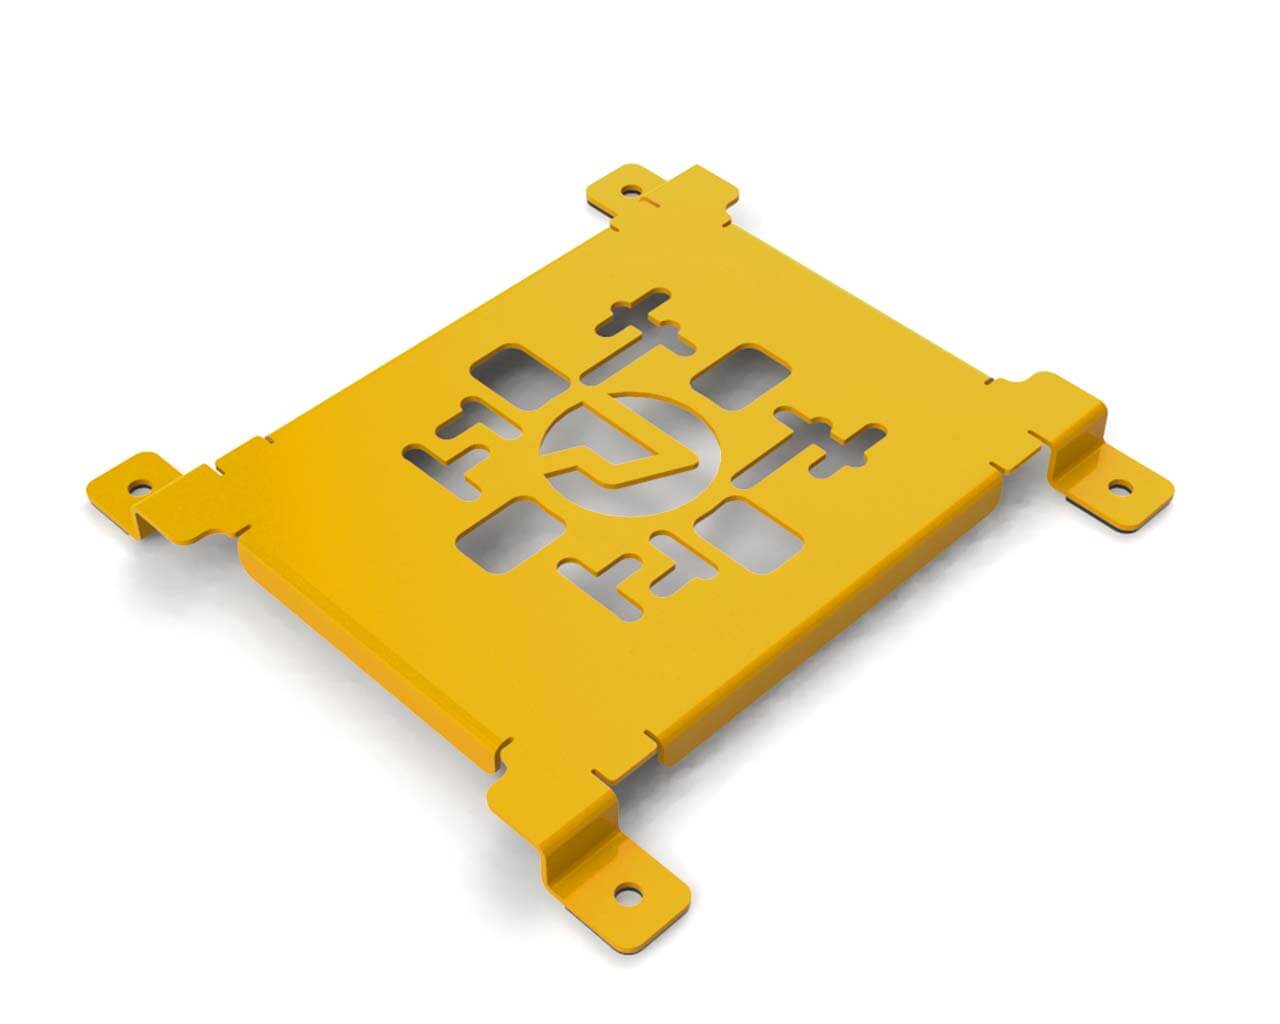 PrimoChill SX Spider Mount Bracket - 140mm Series - PrimoChill - KEEPING IT COOL Yellow